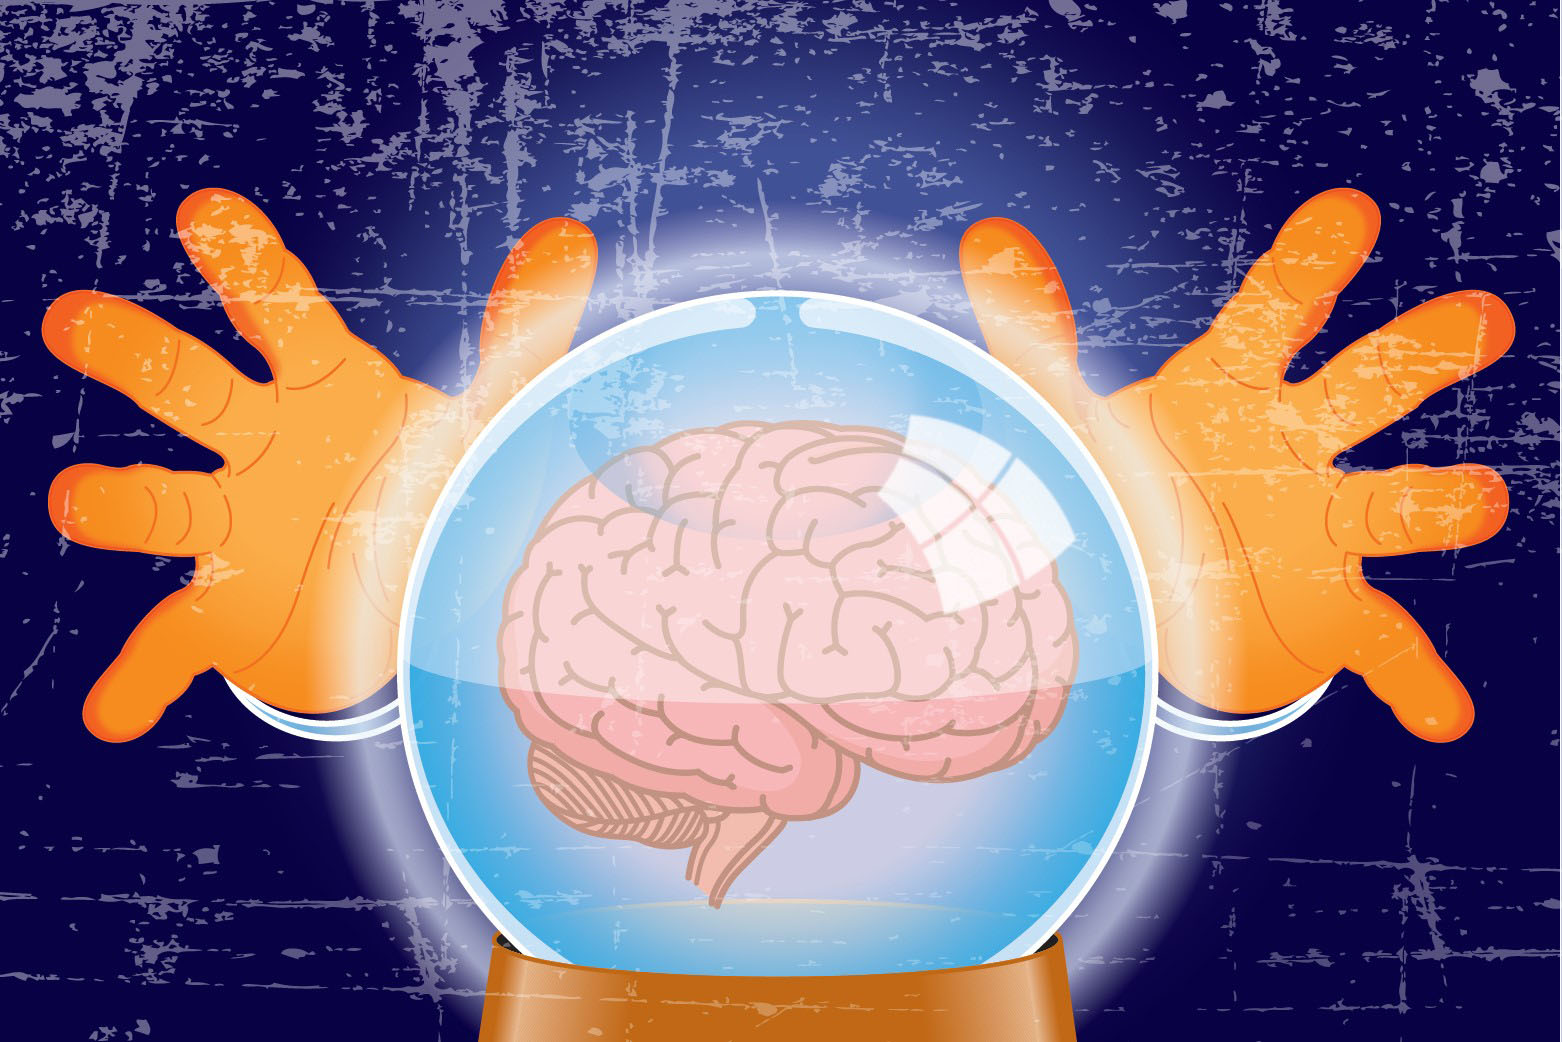 The image of a brain inside a crystal ball is used to illustrate the concept of affective forecasting.